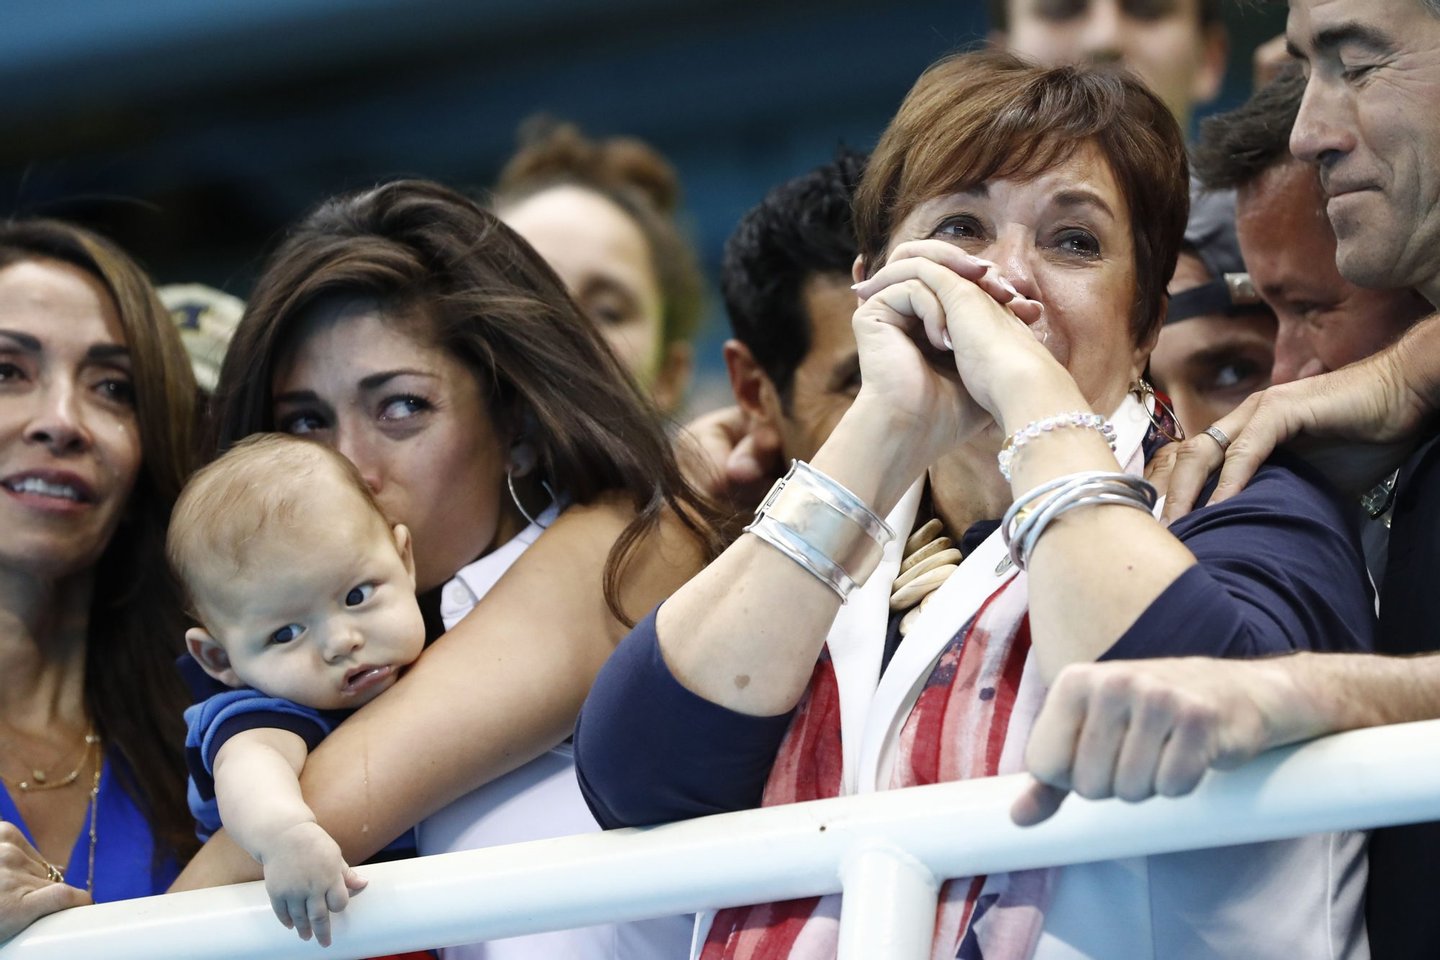 USA's Michael Phelps' mother Deborah (R) and partner Nicole Johnson holding Michael Phelps' son, Boomer cry during the podium ceremony of the Men's swimming 4 x 100m Medley Relay Final at the Rio 2016 Olympic Games at the Olympic Aquatics Stadium in Rio de Janeiro on August 13, 2016. / AFP / Odd ANDERSEN (Photo credit should read ODD ANDERSEN/AFP/Getty Images)